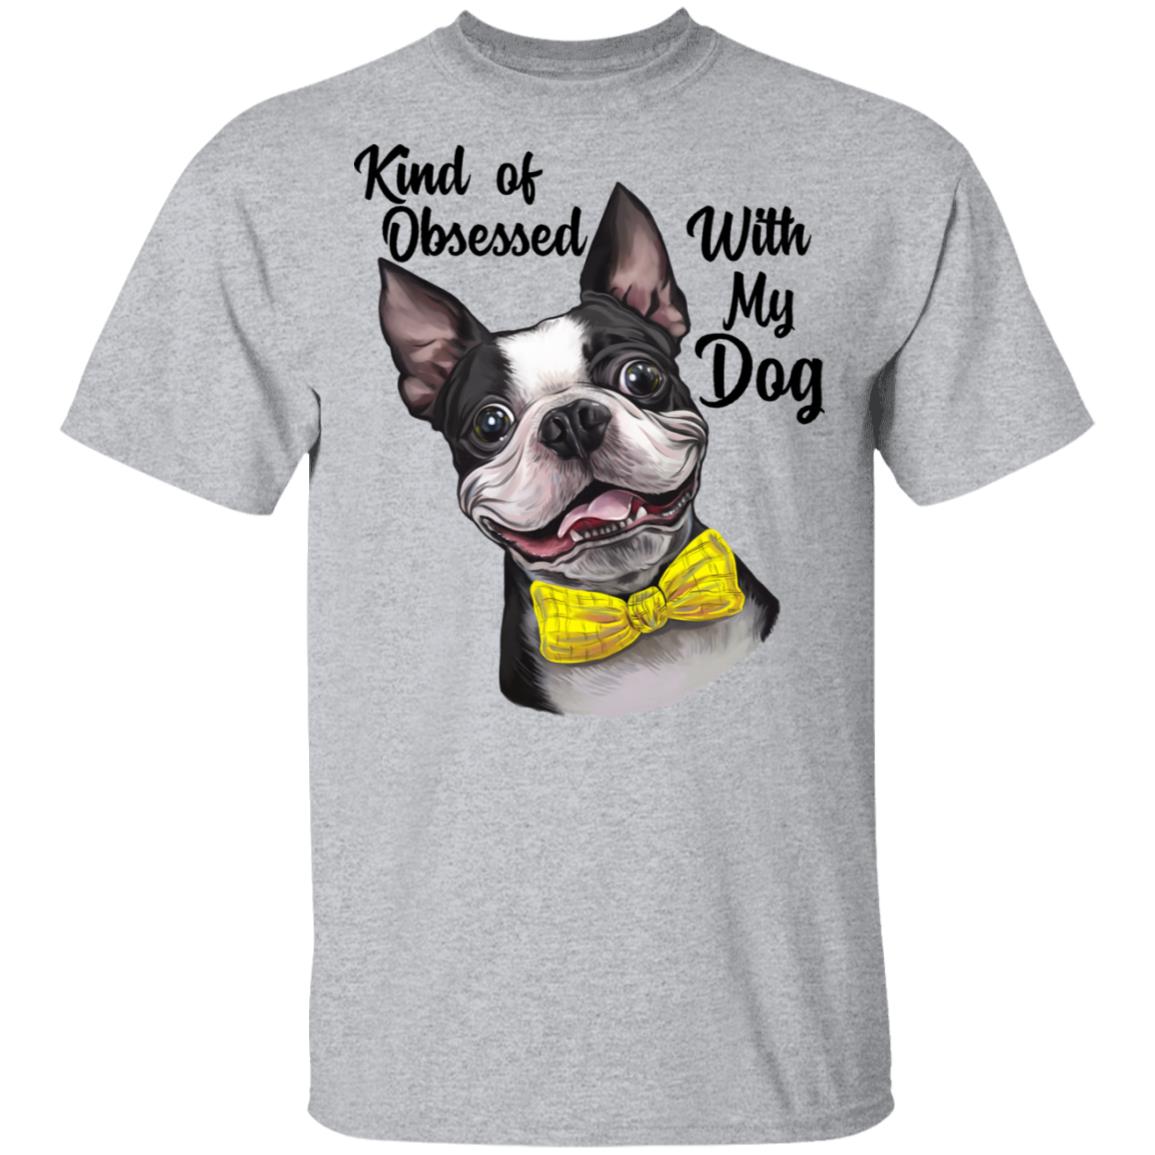 Boston Terrier shirt, Kind of Obsessed With my Boston Terrier Dog funny T-Shirt - GoneBold.gift